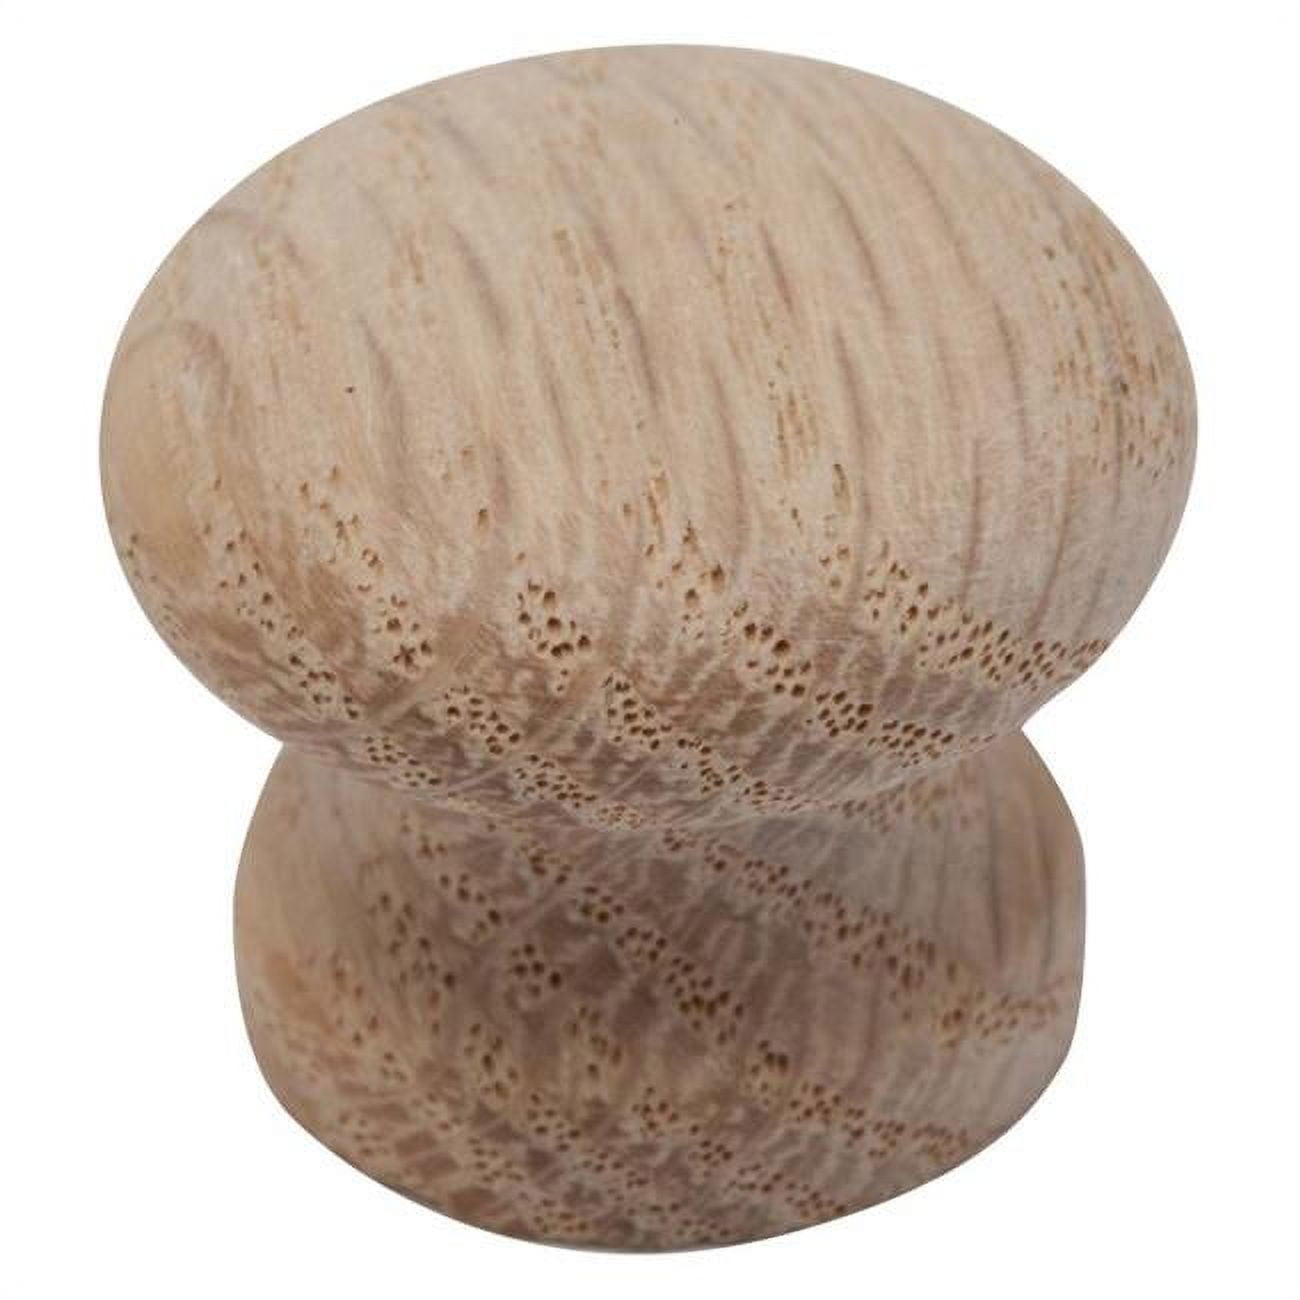 Picture of Waddell 5993019 1.25 in. Dia. x 0.5 in. Round Cabinet Knob - Natural